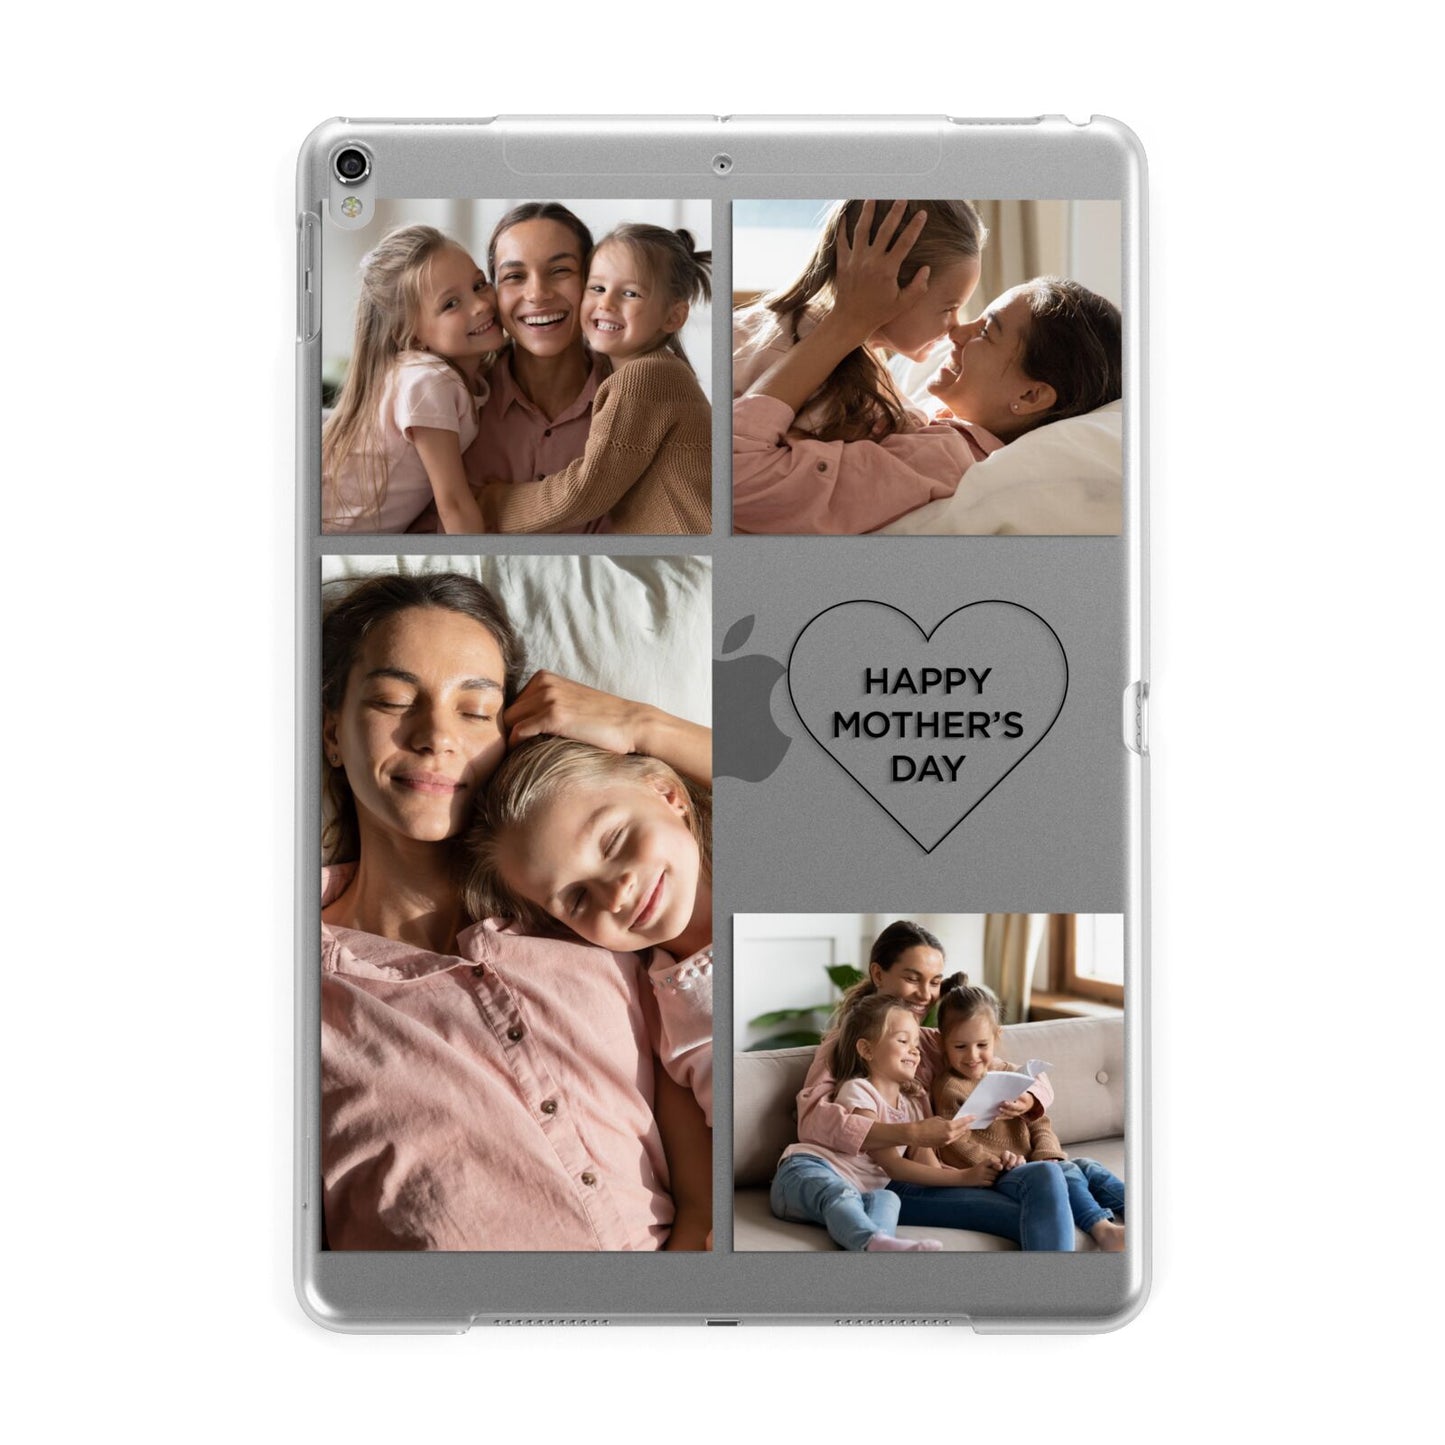 Mothers Day Multi Photo Tiles Apple iPad Silver Case